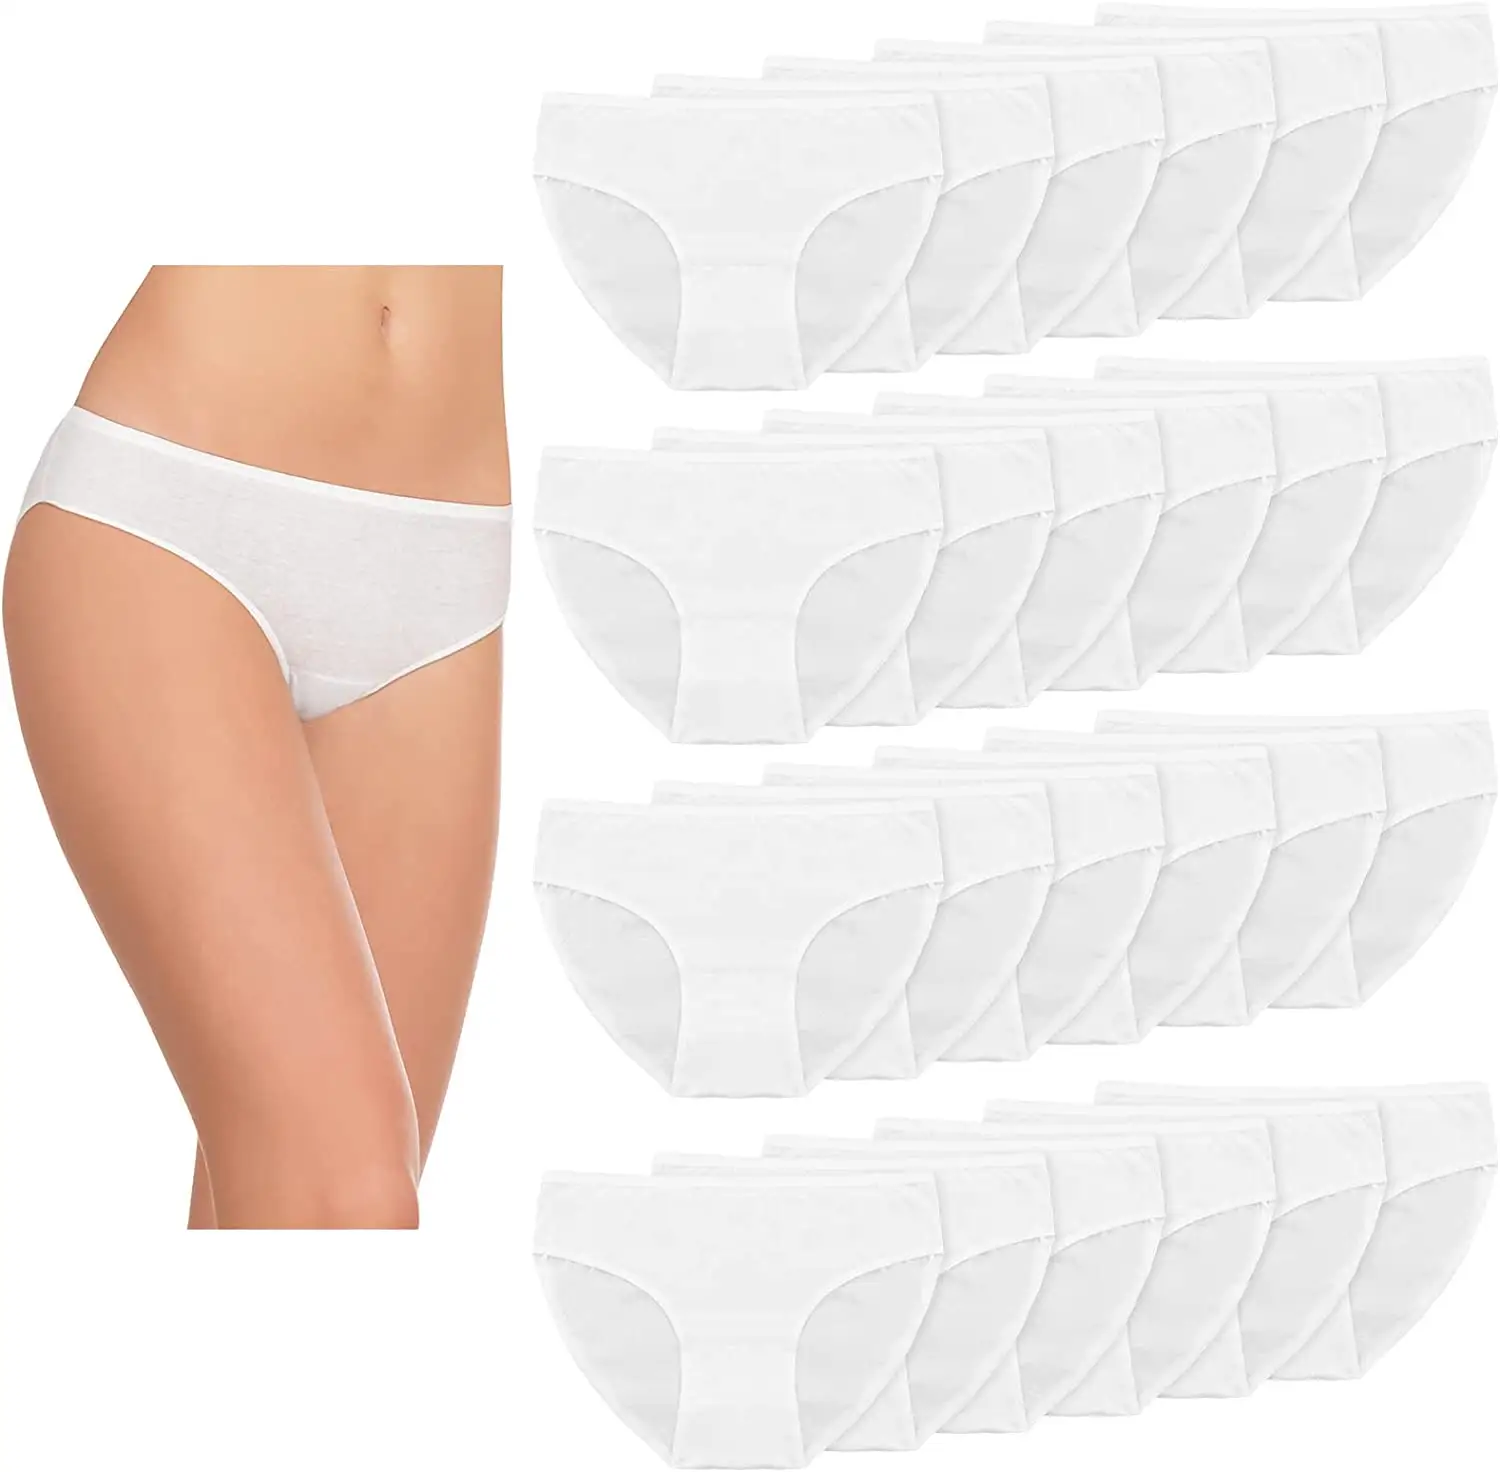 Girls Disposable Cotton Underwear Panties Briefs For Travel And Home Use, Lightweight Breathable Individually Compact Wrapped